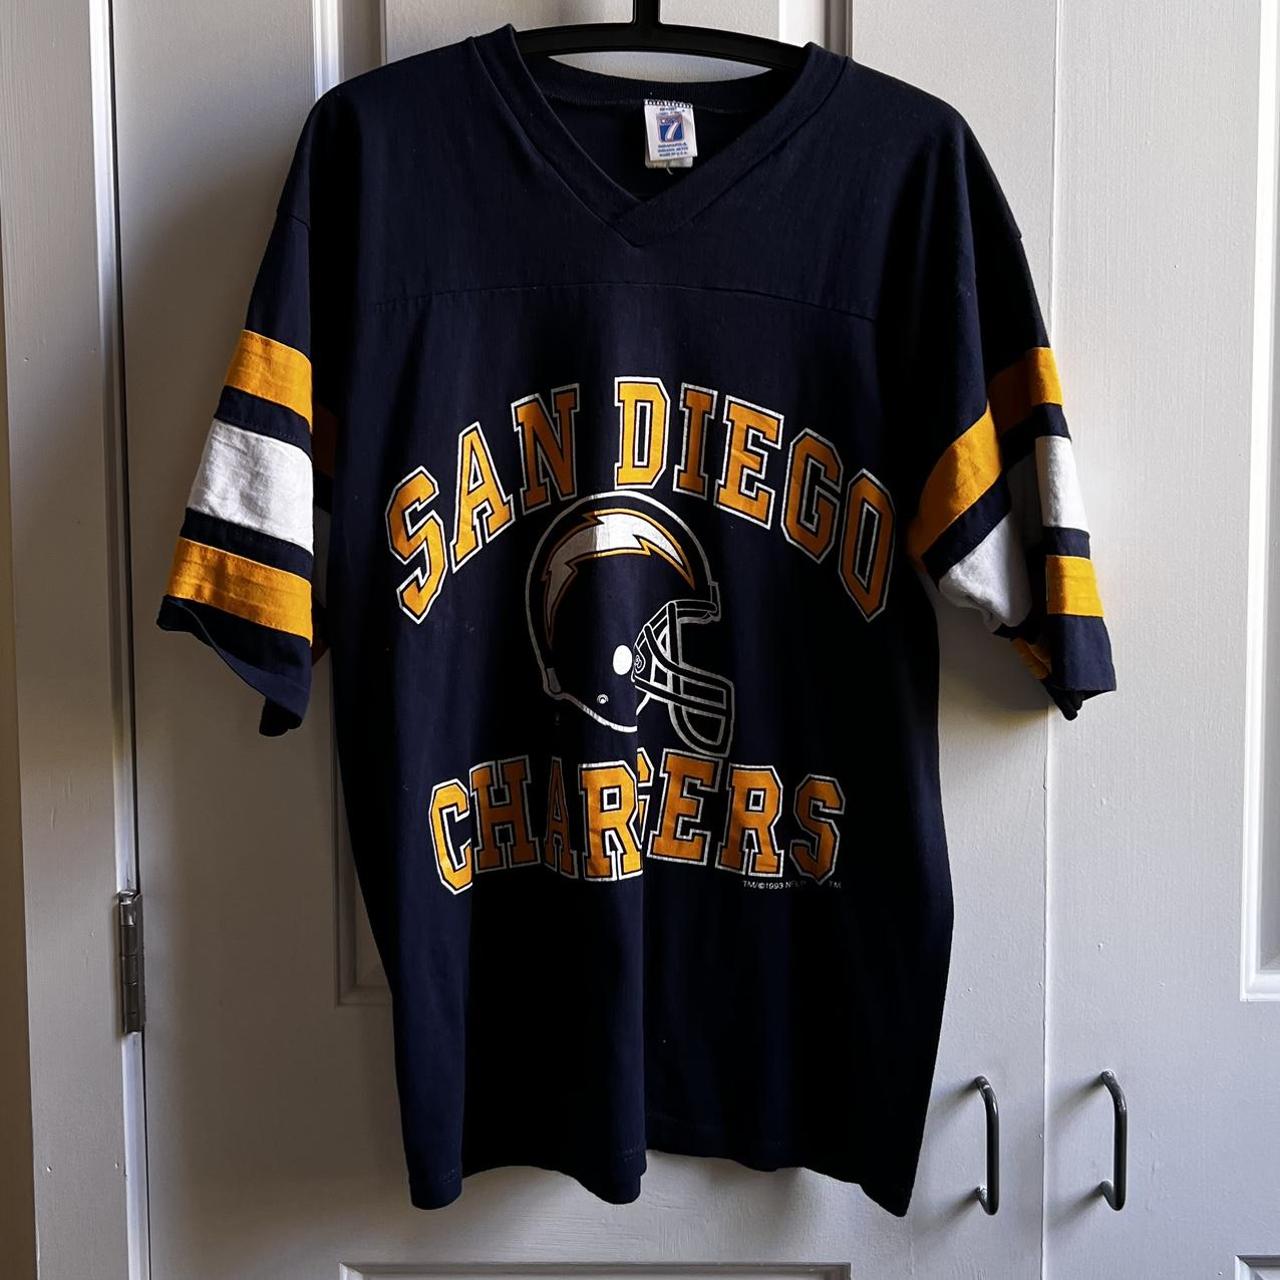 San Diego Chargers Throwback Apparel & Jerseys